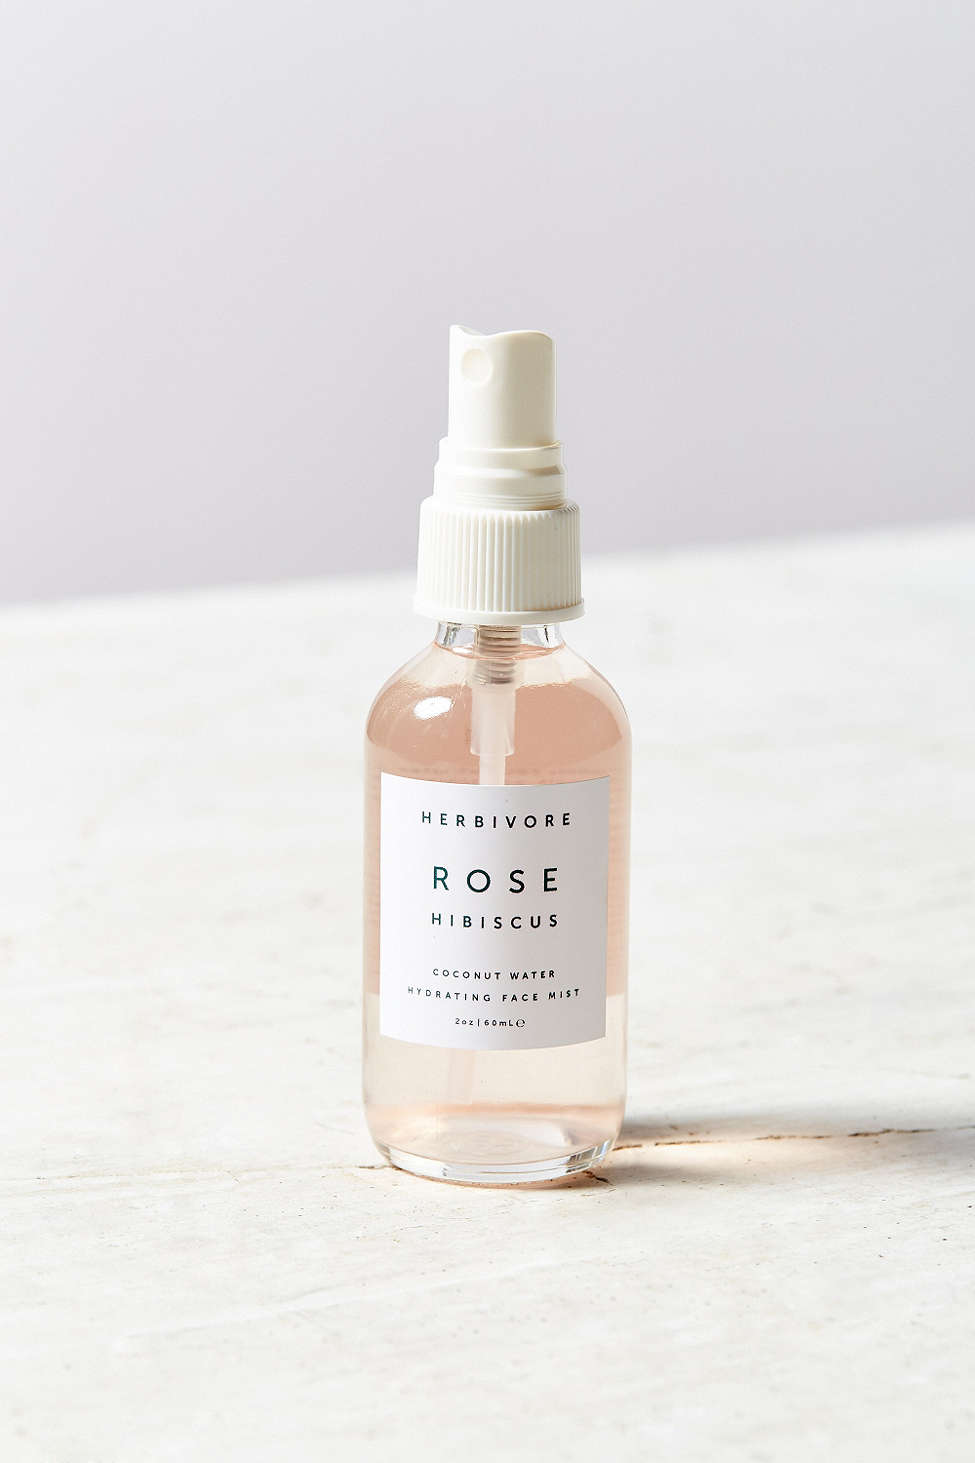 Rose face mist from Urban Outfitters